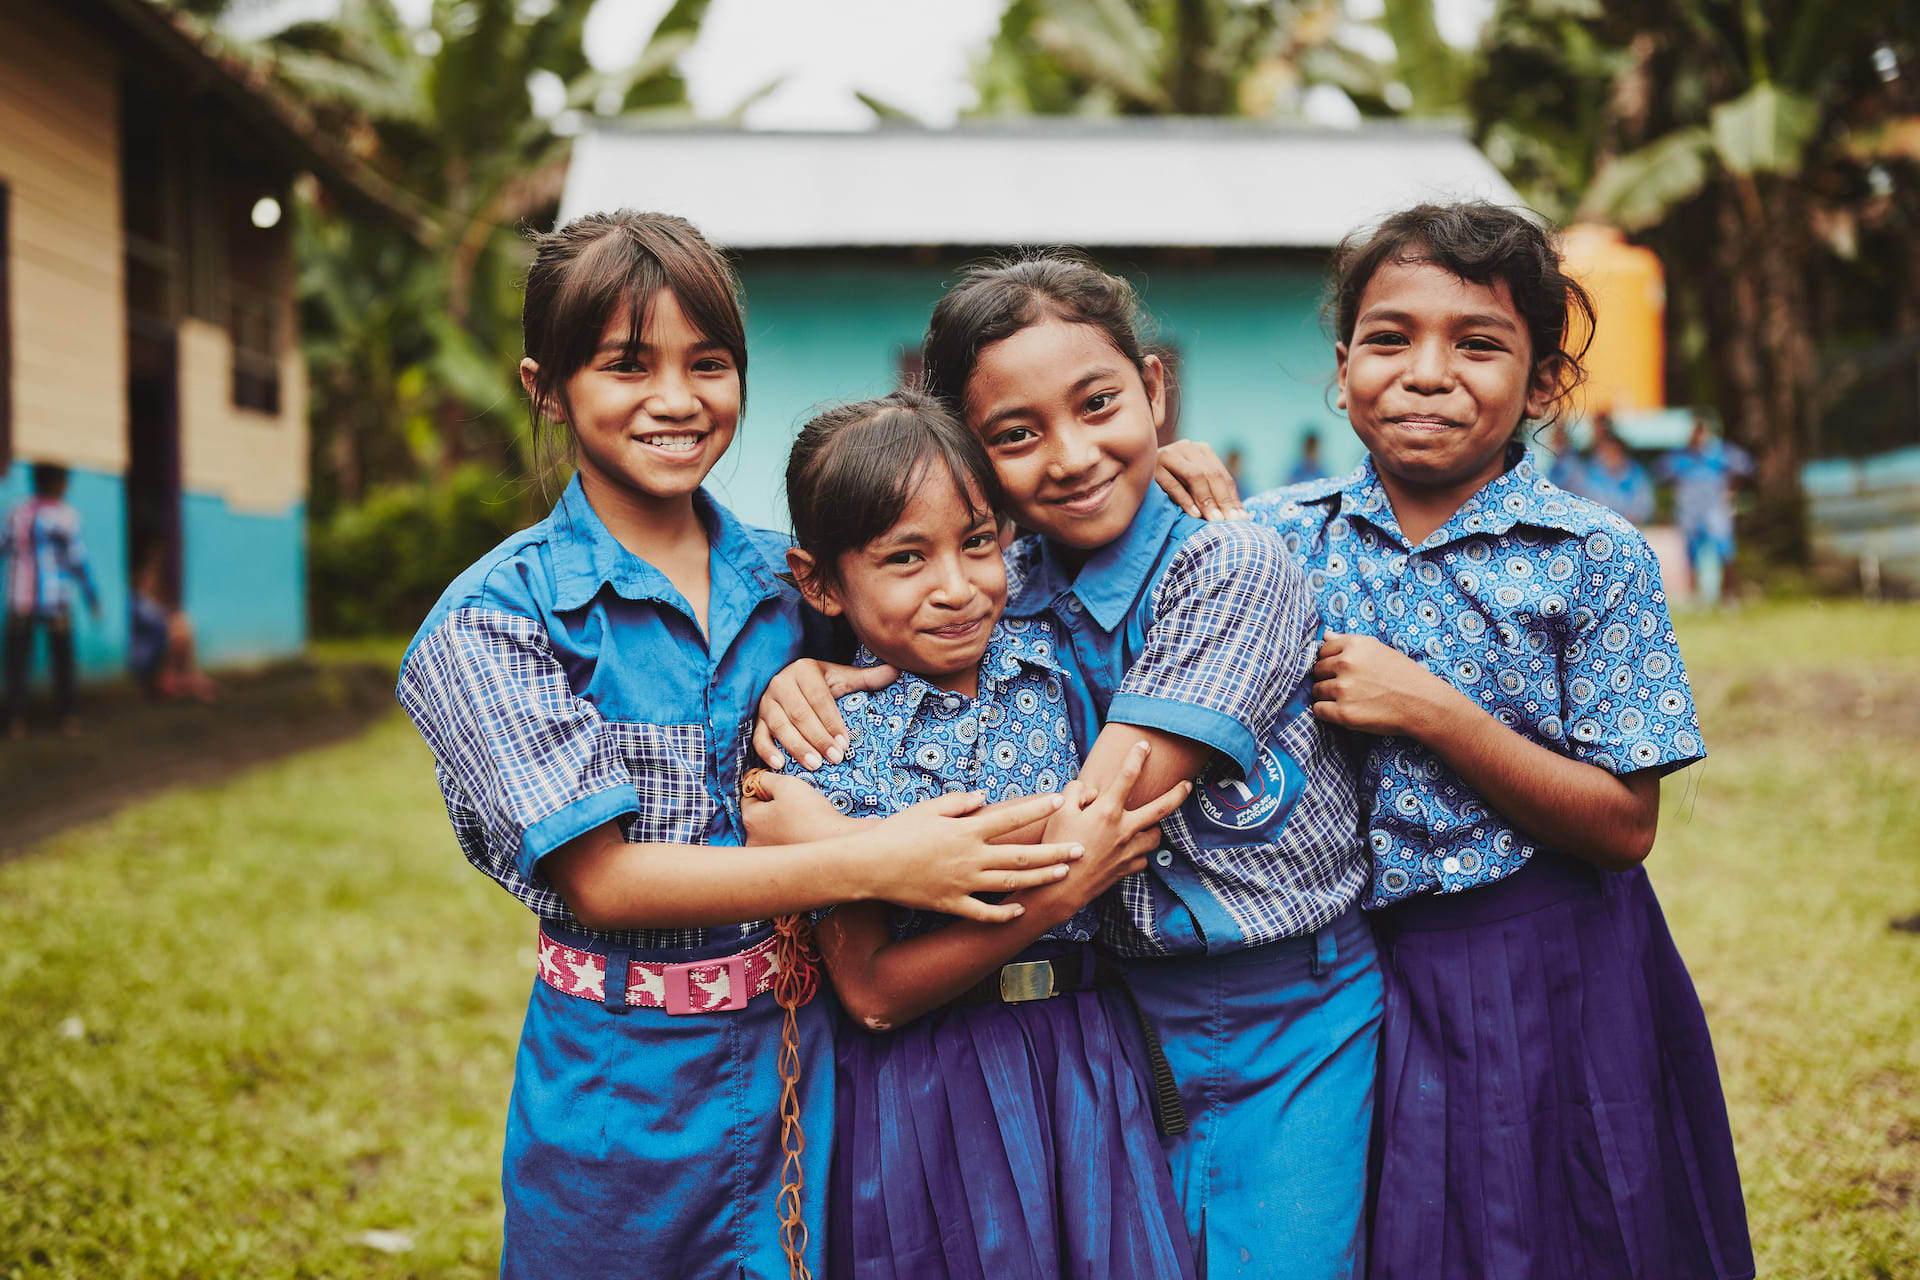 Gifts of Compassion cover image. Four girls in Indonesia, wearing blue plaid uniform shirts and purple skirts, stand together outside with arms around each other posing for a photo.